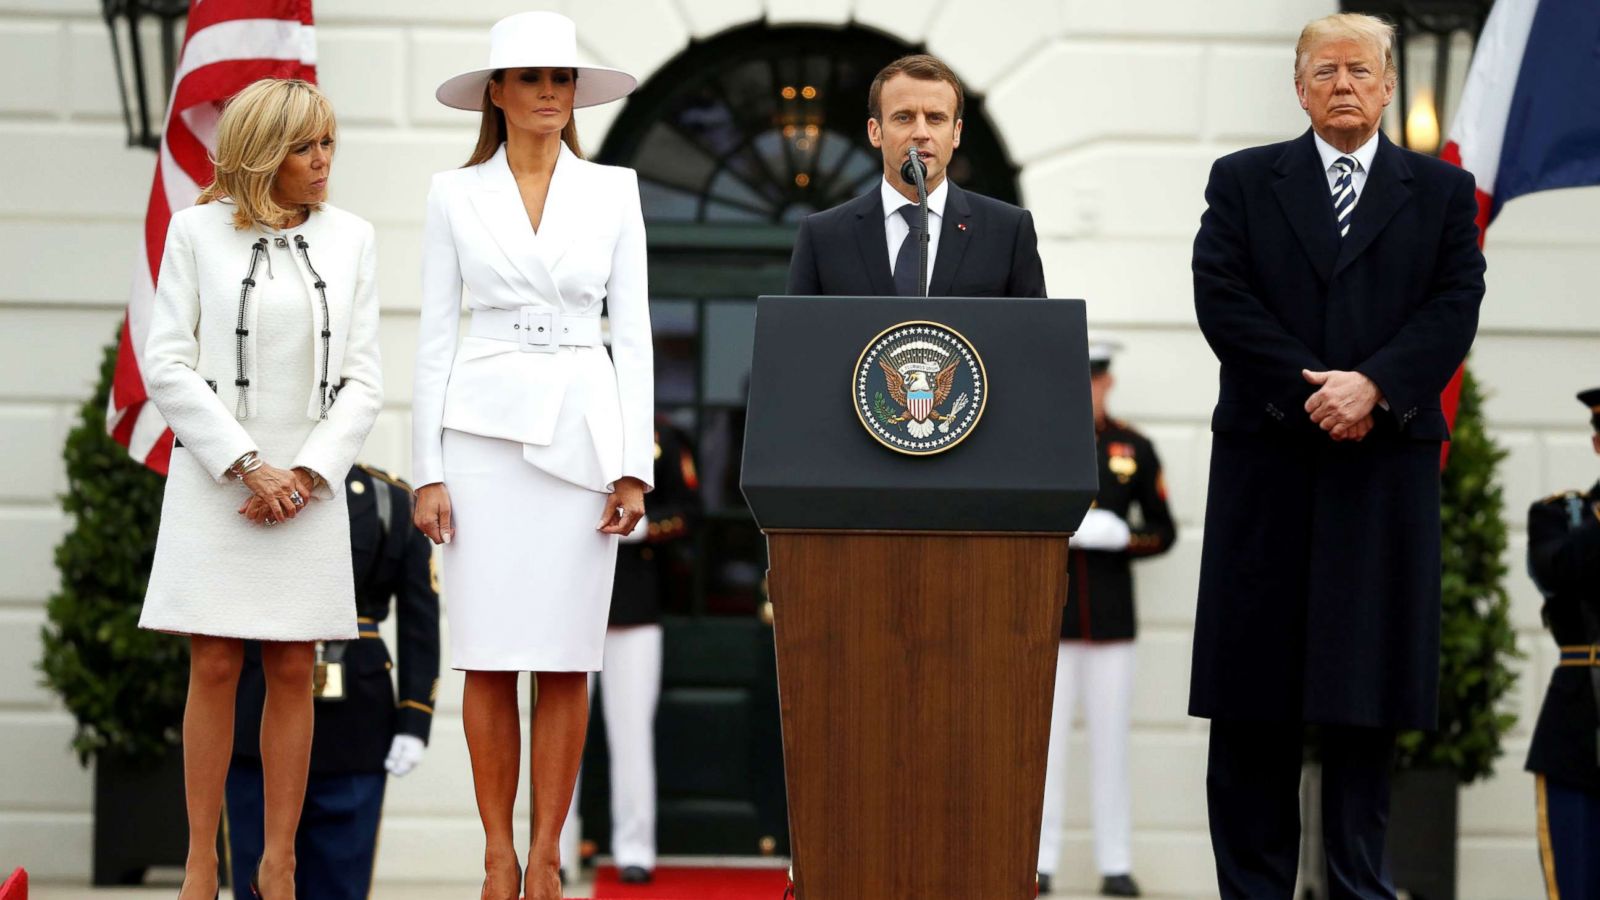 PHOTO: French President Emmanuel Macron speaks during an arrival ceremony at the White House, April 24, 2018.